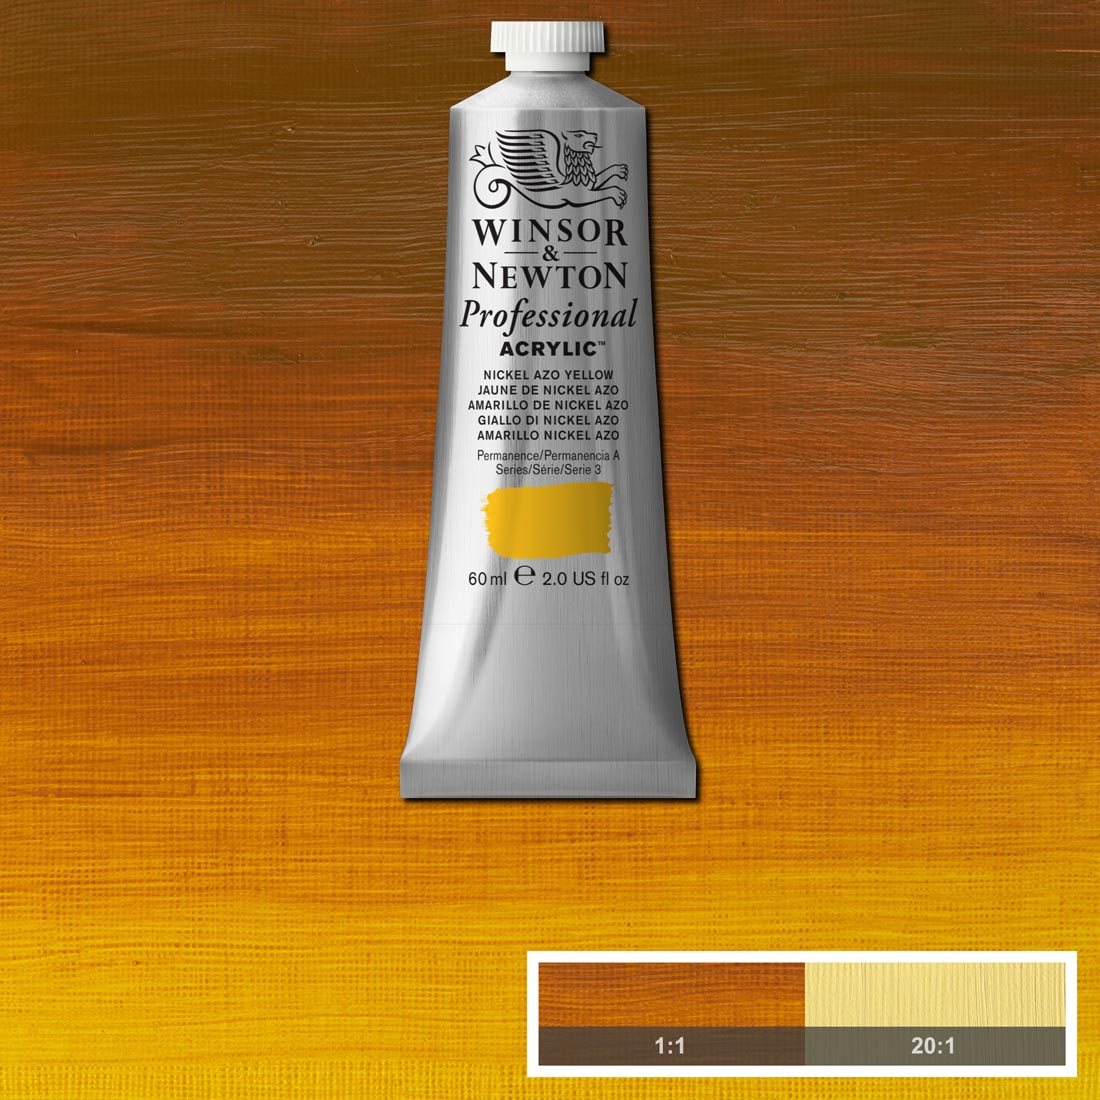 Tube of Nickel Azo Yellow Winsor and Newton Professional Acrylic with paint swatch in the background